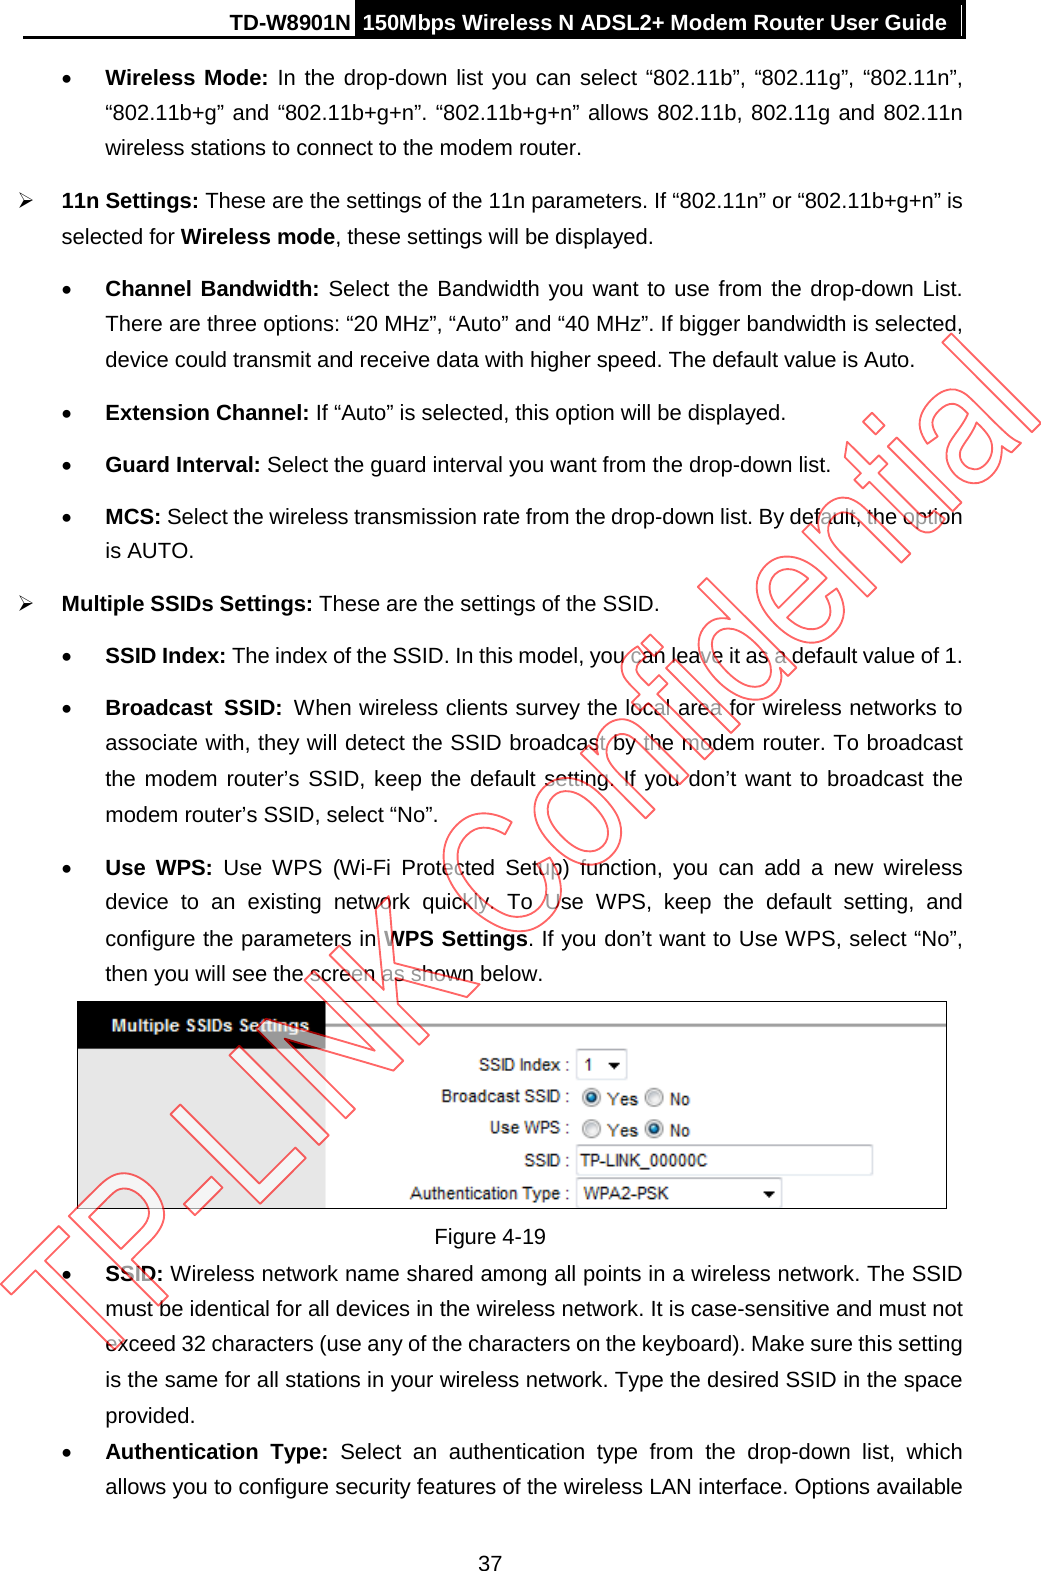 TD-W8901N 150Mbps Wireless N ADSL2+ Modem Router User Guide  • Wireless Mode: In the drop-down list you can select “802.11b”, “802.11g”, “802.11n”, “802.11b+g” and “802.11b+g+n”. “802.11b+g+n” allows 802.11b, 802.11g and 802.11n wireless stations to connect to the modem router.  11n Settings: These are the settings of the 11n parameters. If “802.11n” or “802.11b+g+n” is selected for Wireless mode, these settings will be displayed. • Channel Bandwidth: Select the Bandwidth you want to use from the drop-down List. There are three options: “20 MHz”, “Auto” and “40 MHz”. If bigger bandwidth is selected, device could transmit and receive data with higher speed. The default value is Auto. • Extension Channel: If “Auto” is selected, this option will be displayed. • Guard Interval: Select the guard interval you want from the drop-down list. • MCS: Select the wireless transmission rate from the drop-down list. By default, the option is AUTO.  Multiple SSIDs Settings: These are the settings of the SSID. • SSID Index: The index of the SSID. In this model, you can leave it as a default value of 1. • Broadcast  SSID: When wireless clients survey the local area for wireless networks to associate with, they will detect the SSID broadcast by the modem router. To broadcast the modem router’s SSID, keep the default setting. If you don’t want to broadcast the modem router’s SSID, select “No”. • Use  WPS:  Use  WPS (Wi-Fi Protected Setup) function, you can add a new wireless device to an existing network quickly. To Use WPS, keep the default setting, and configure the parameters in WPS Settings. If you don’t want to Use WPS, select “No”, then you will see the screen as shown below.  Figure 4-19 • SSID: Wireless network name shared among all points in a wireless network. The SSID must be identical for all devices in the wireless network. It is case-sensitive and must not exceed 32 characters (use any of the characters on the keyboard). Make sure this setting is the same for all stations in your wireless network. Type the desired SSID in the space provided. • Authentication Type:  Select an authentication type from the drop-down list,  which allows you to configure security features of the wireless LAN interface. Options available 37 